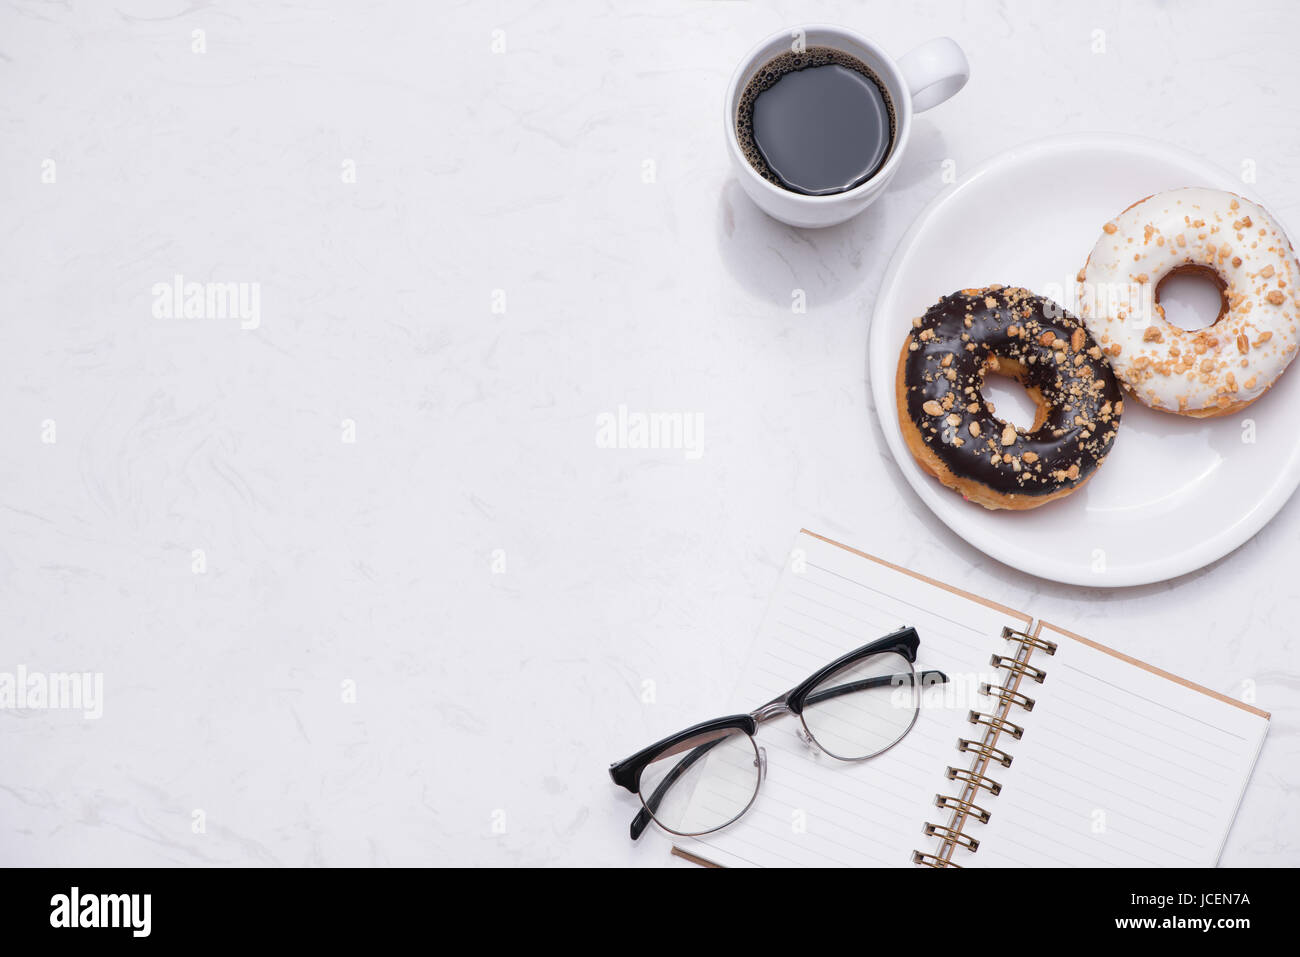 Working desk with dessert and coffee. Cake donuts with a cup of espresso on marble table top. Stock Photo